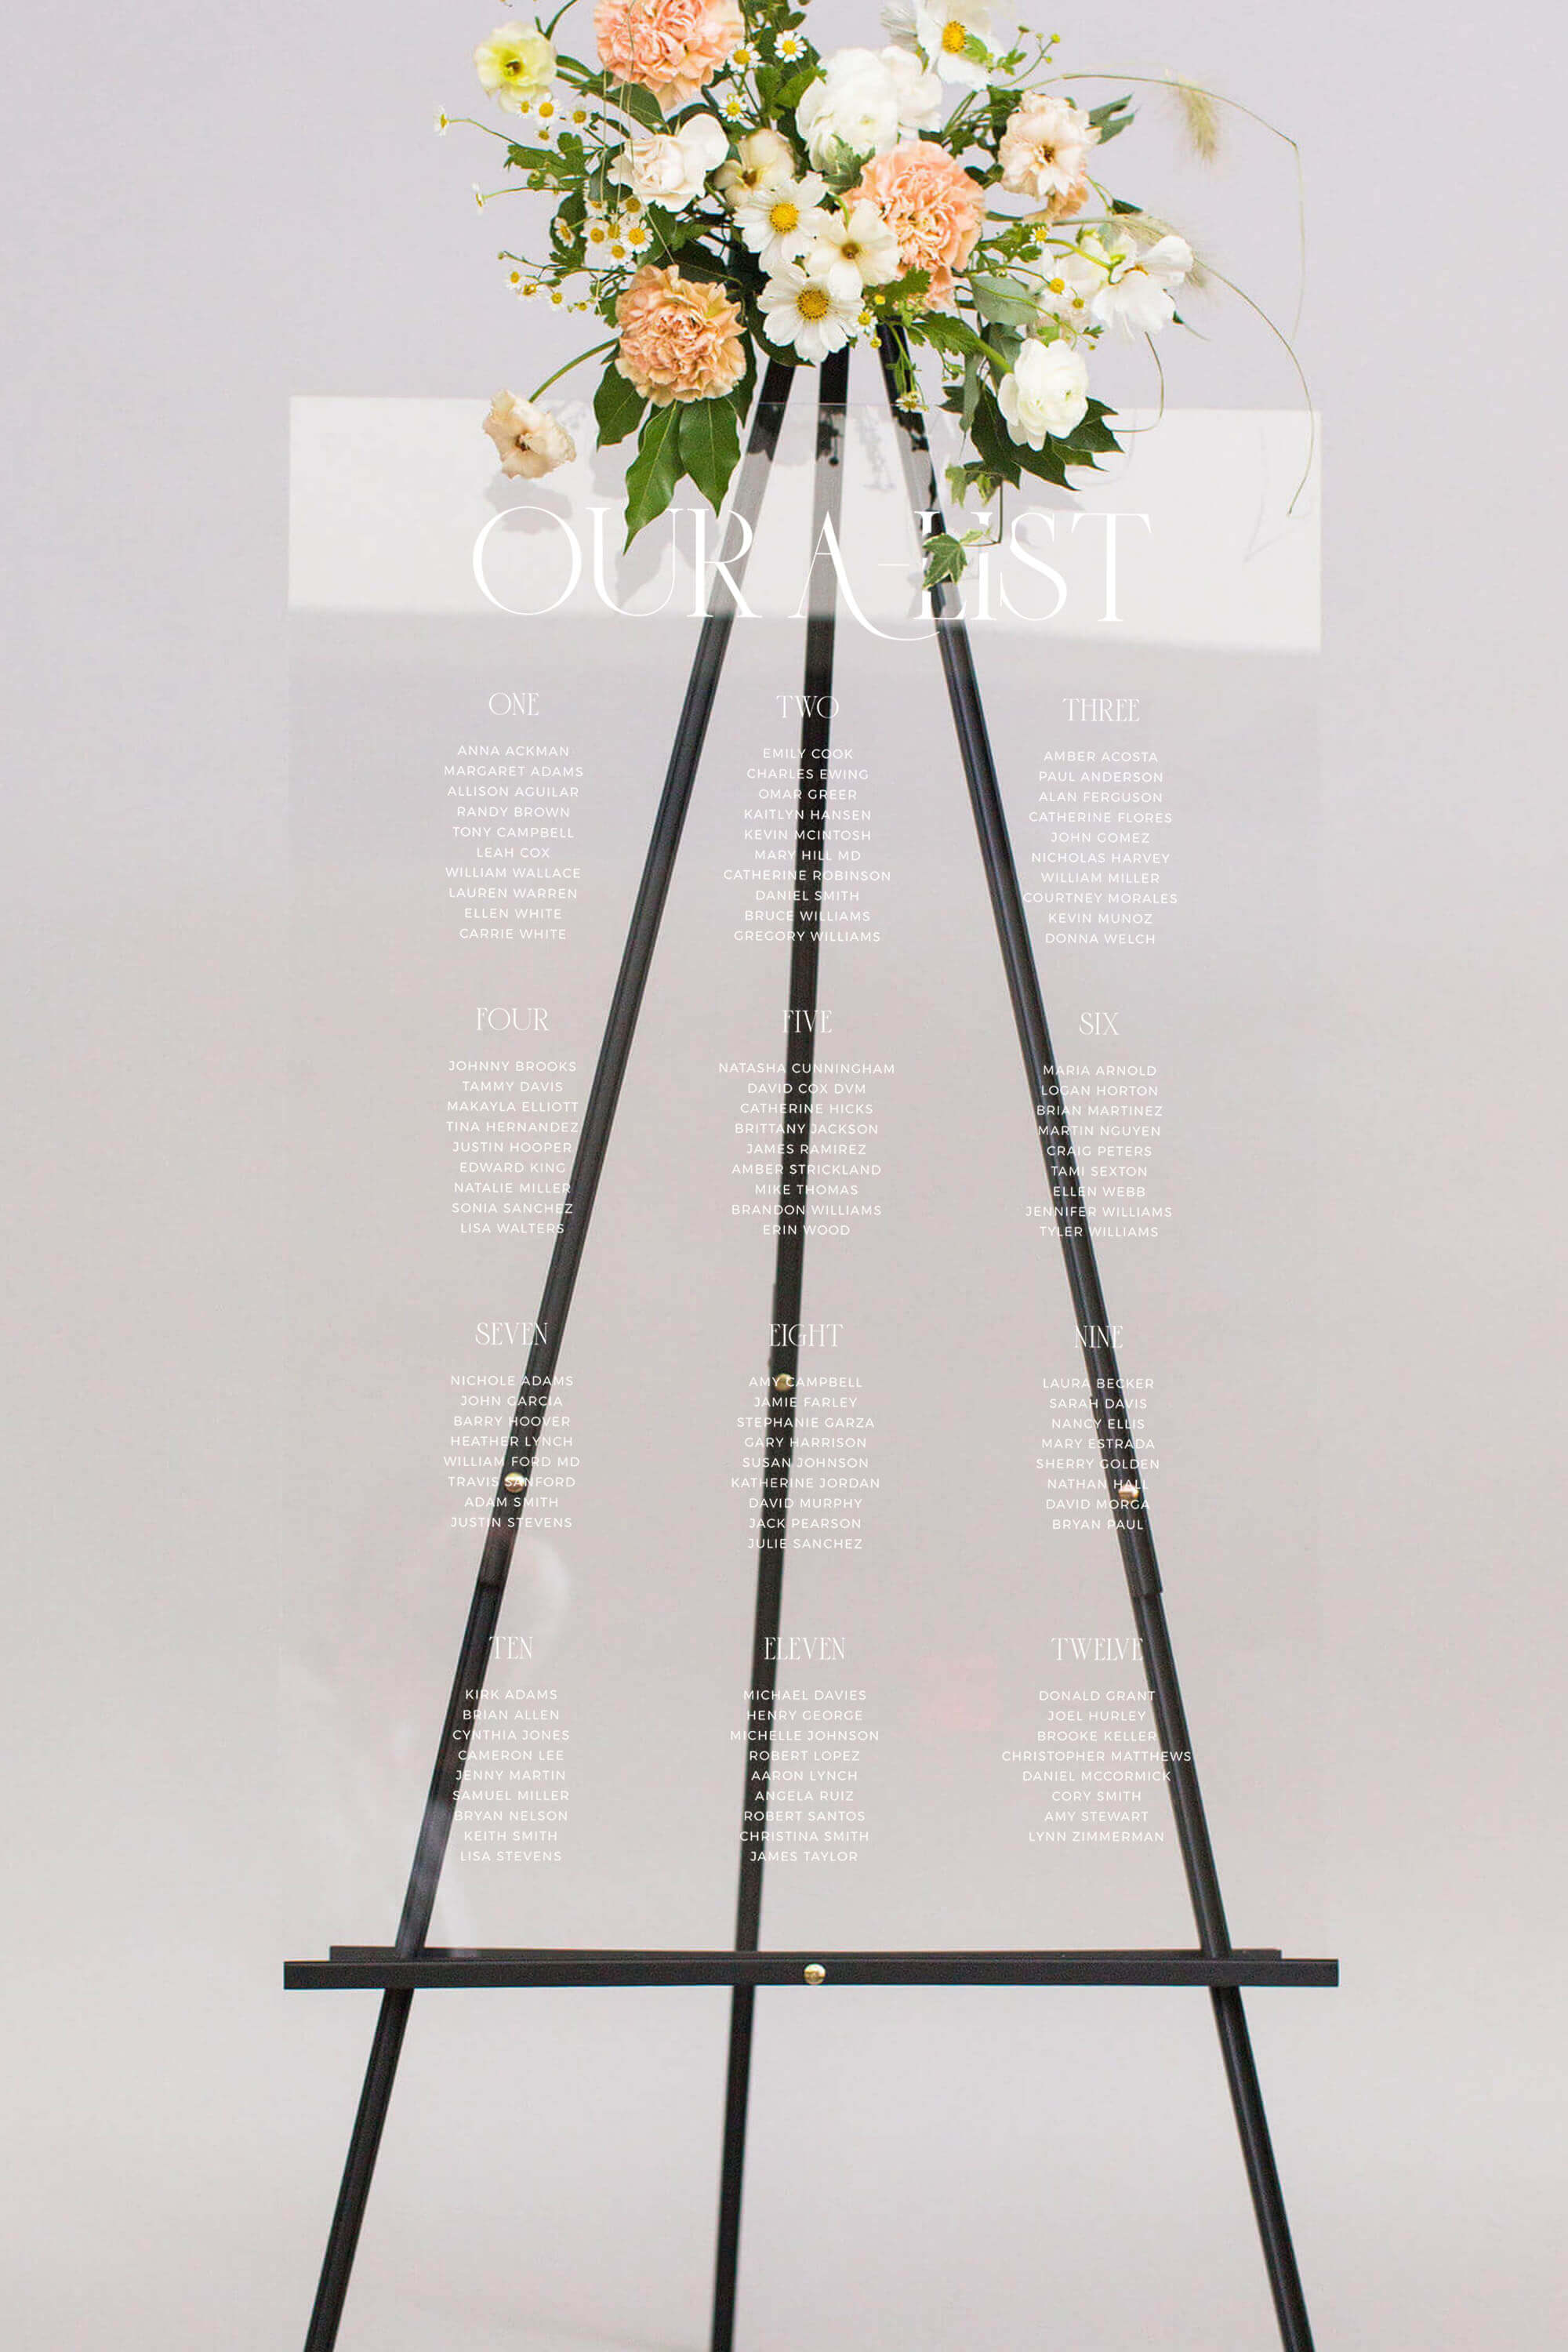 40 Rectangular Over The Table Acrylic Flower Display Stand - Clear